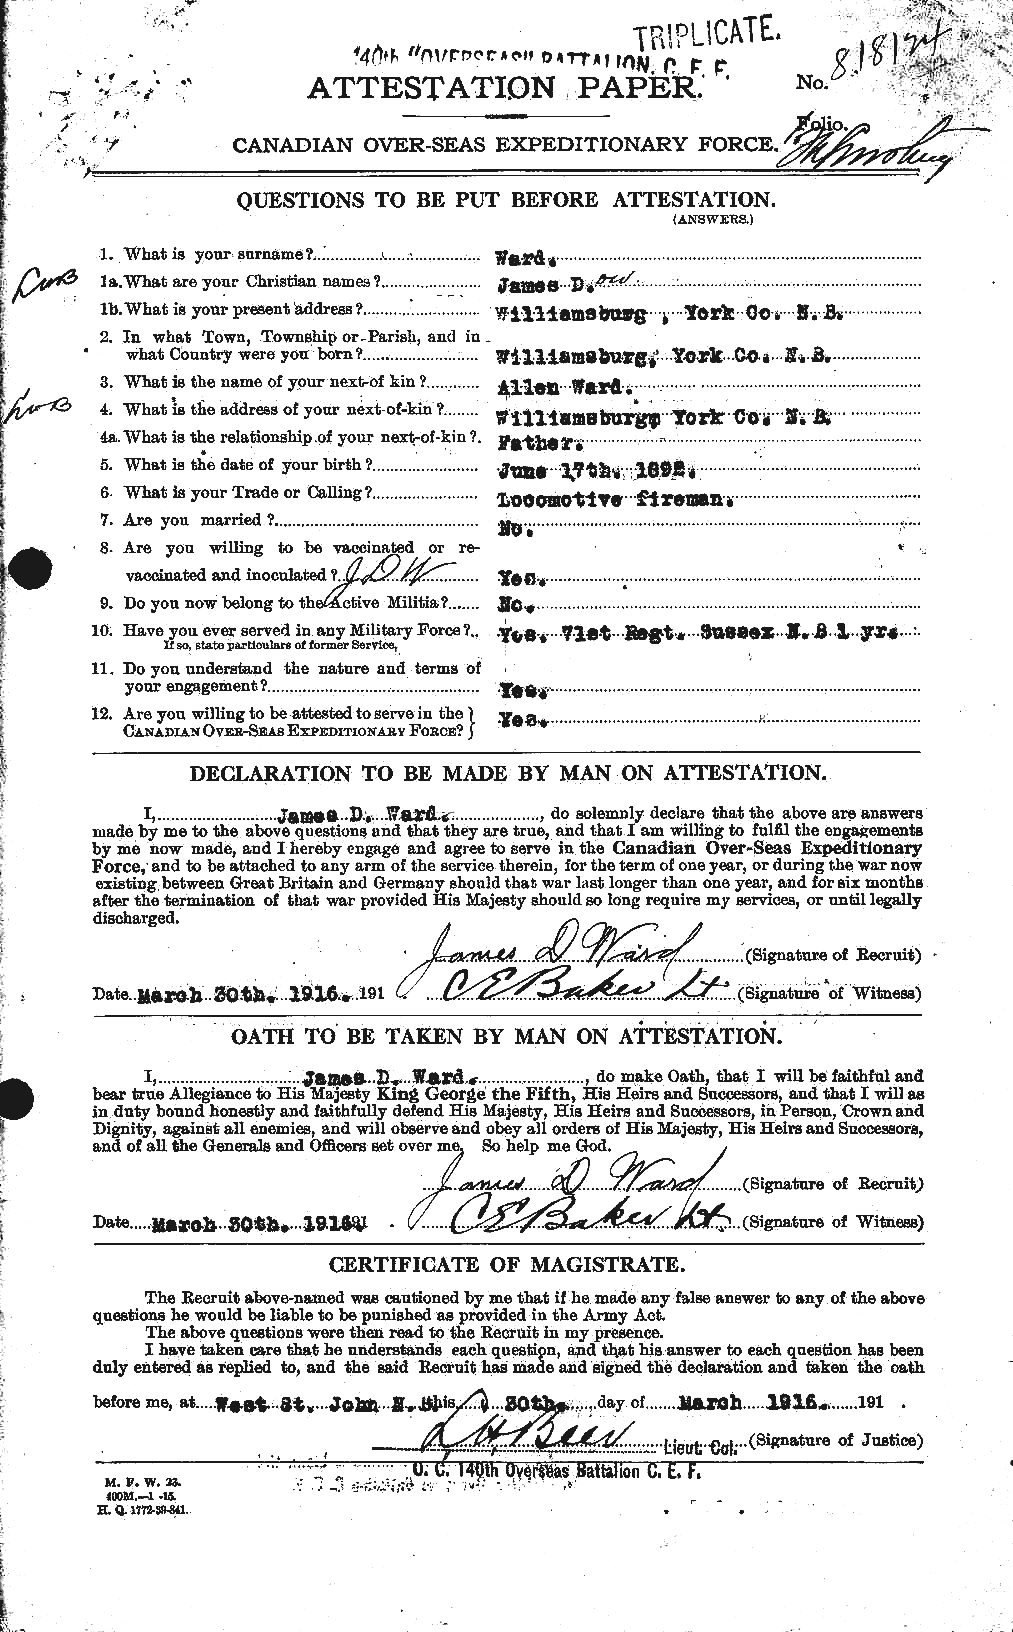 Personnel Records of the First World War - CEF 657901a